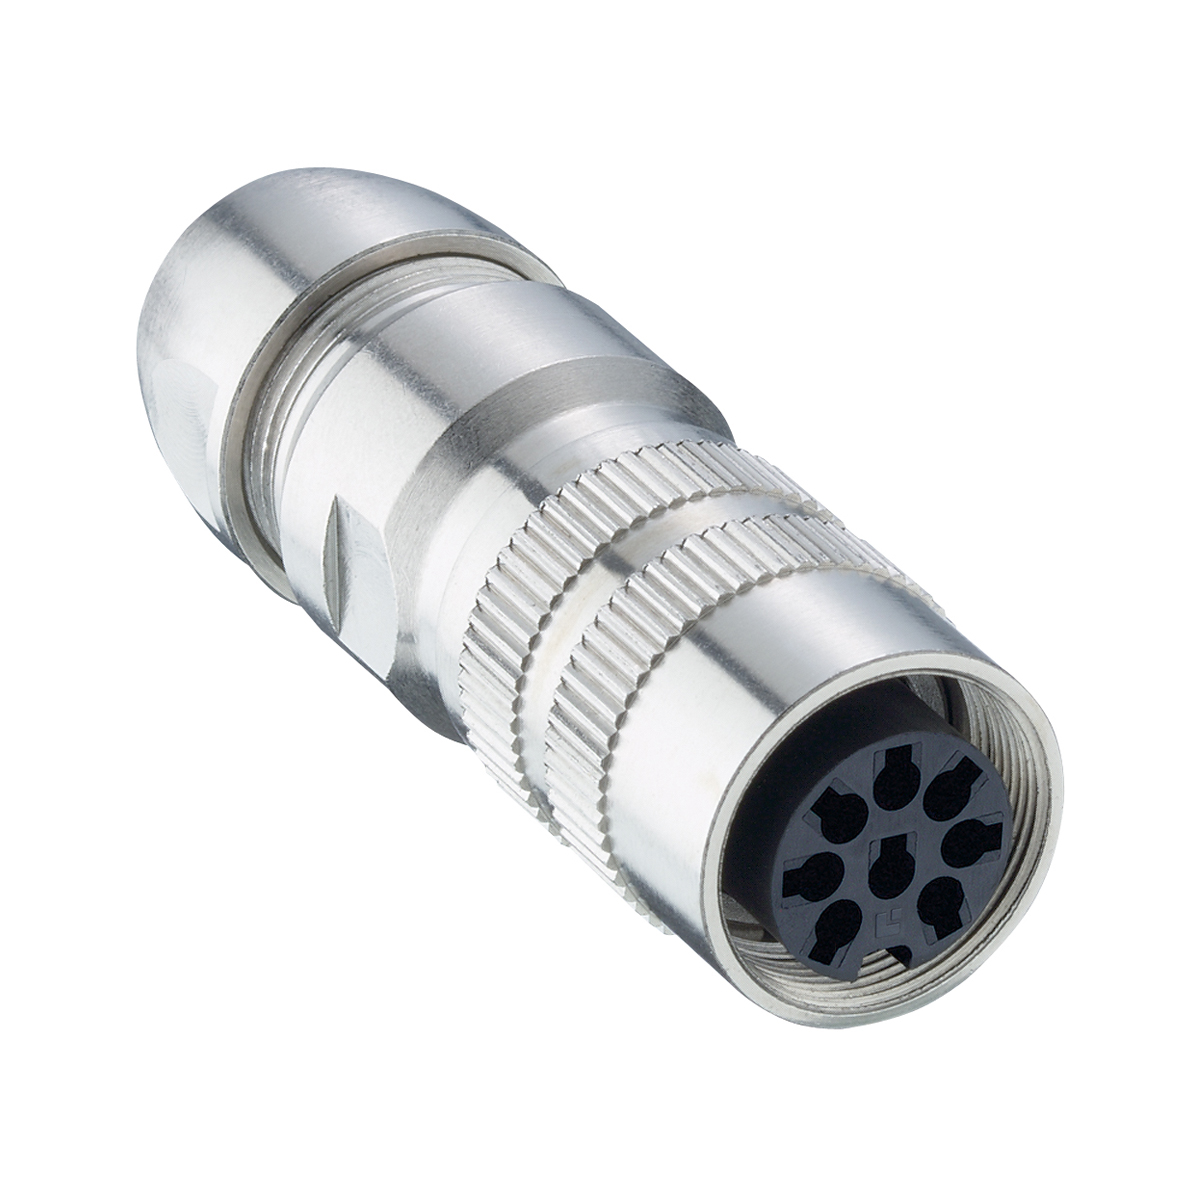 Lumberg: 36000 (Series 03 | Circular connectors with threaded joint M16 acc. to IEC 61076-2-106, IP40/IP68)